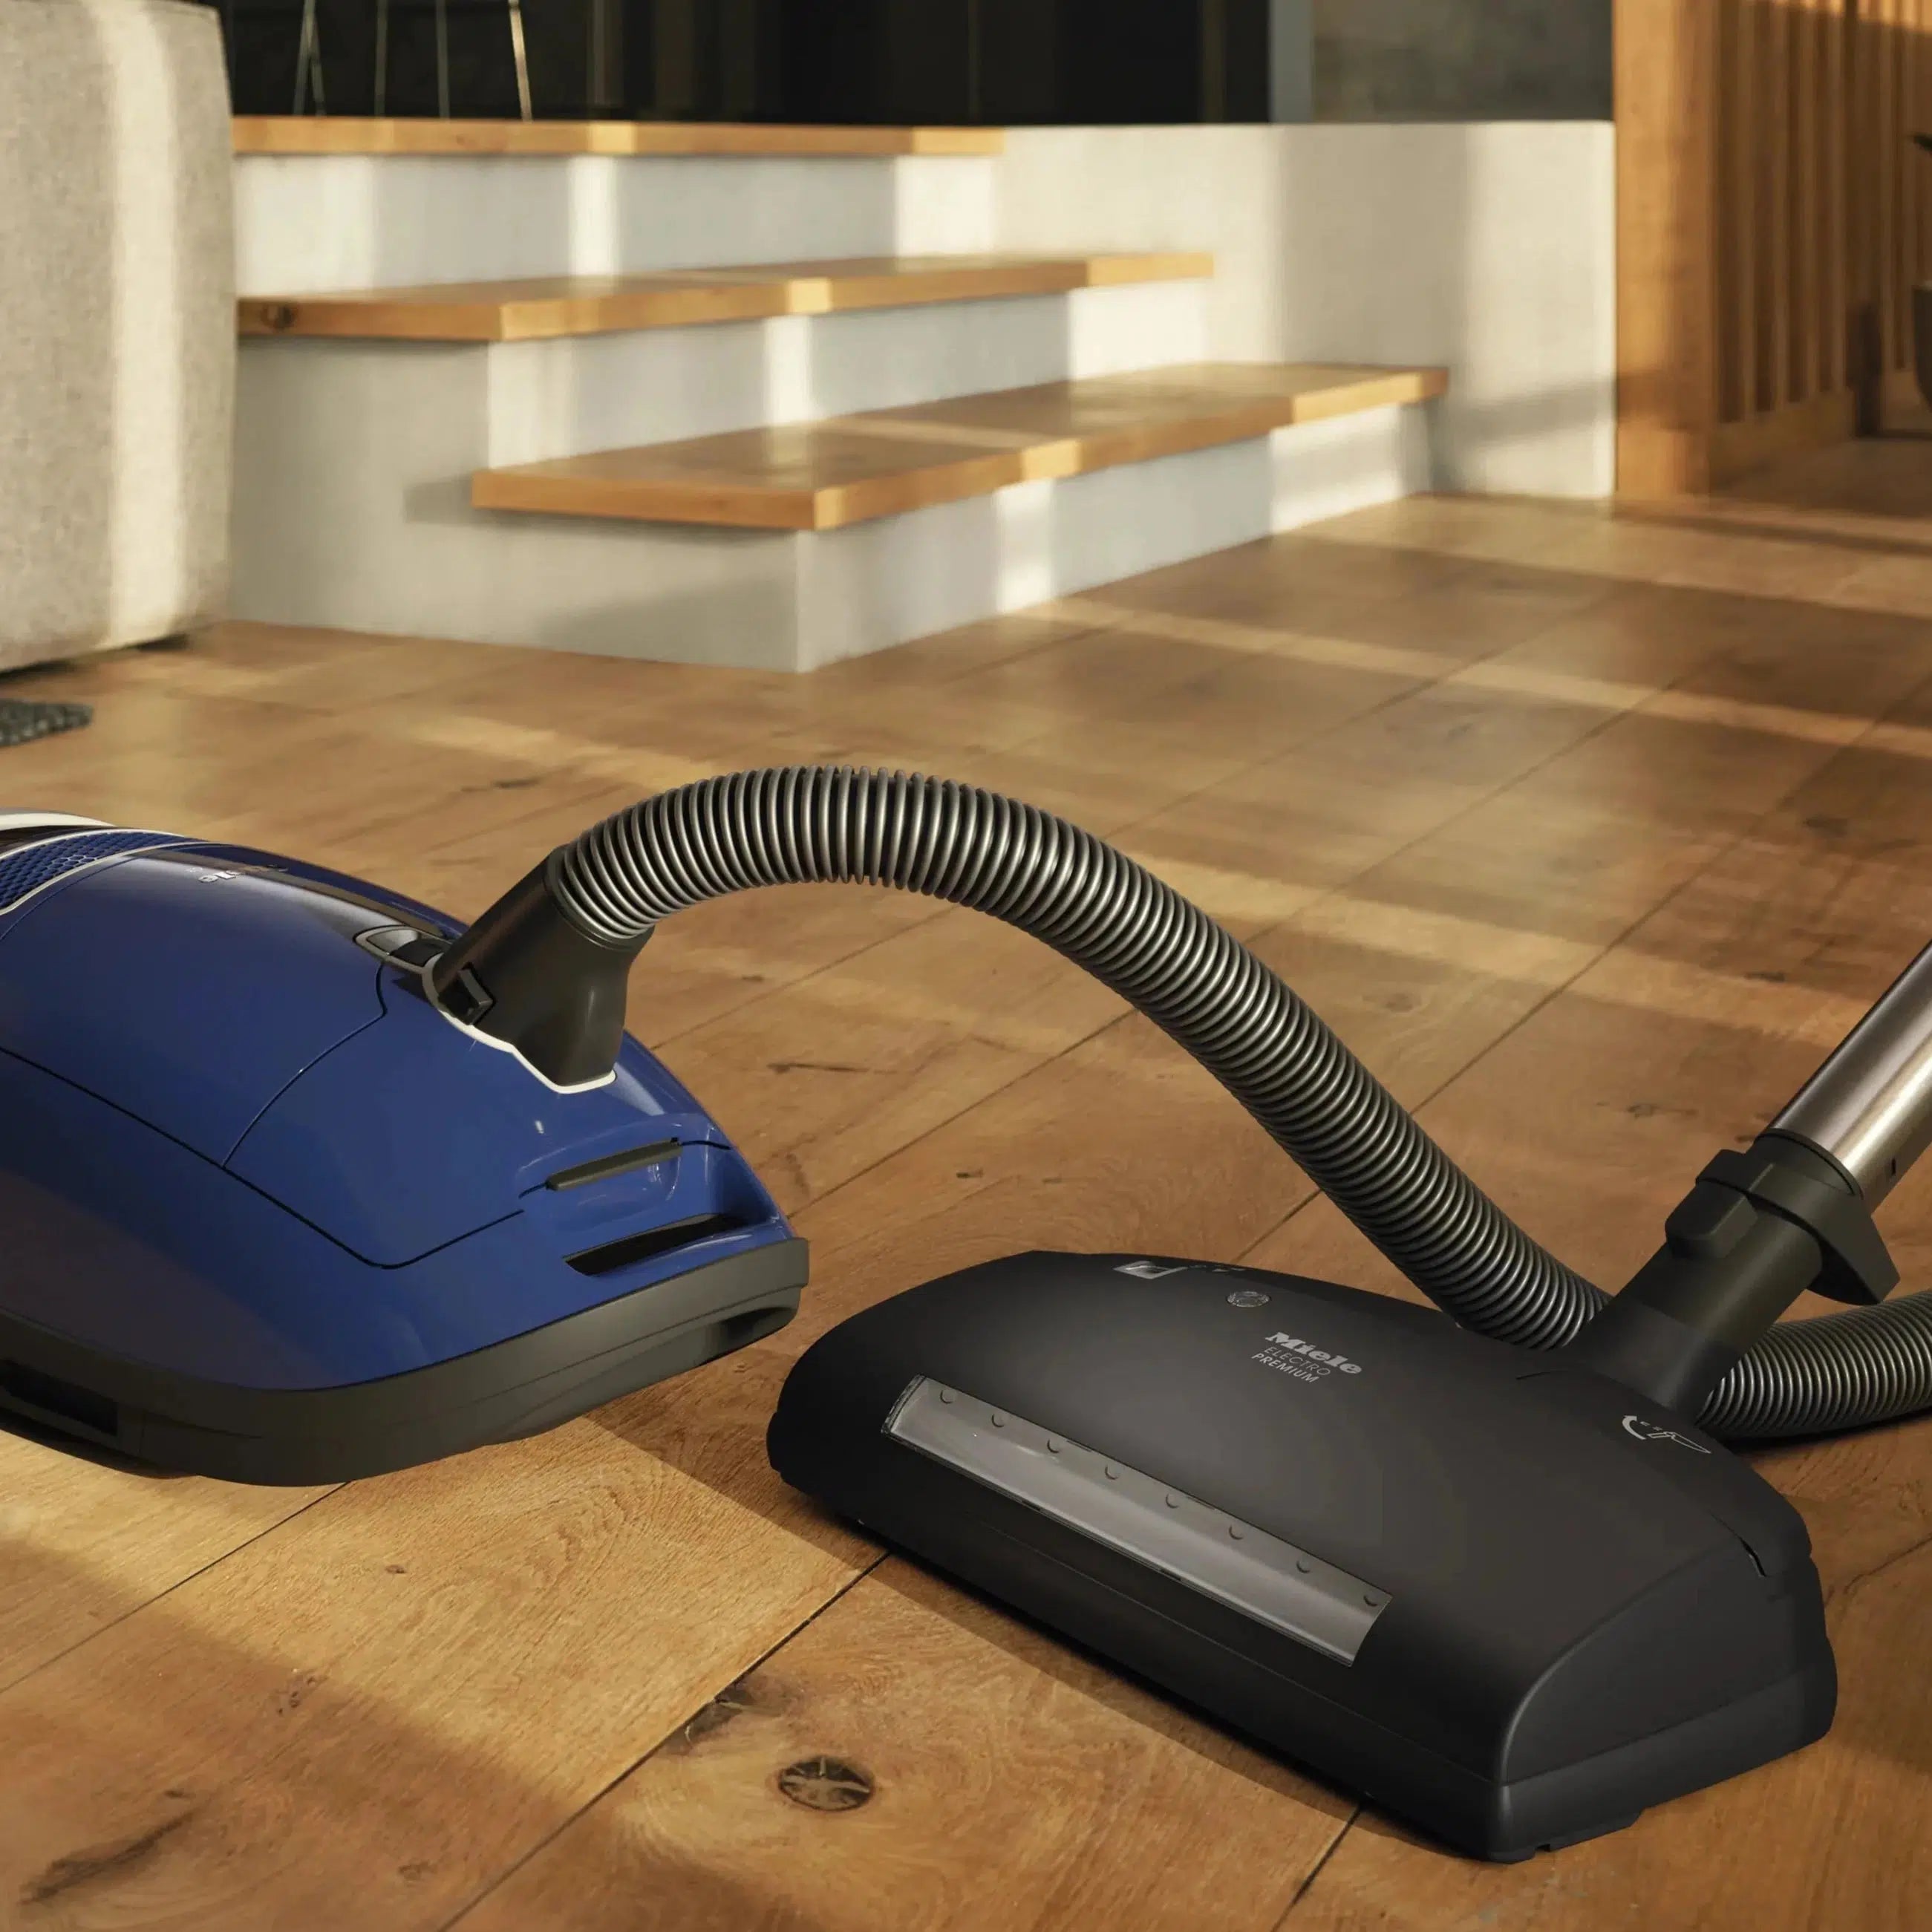 Miele Complete C3 Marin Canister Vacuum Cleaner